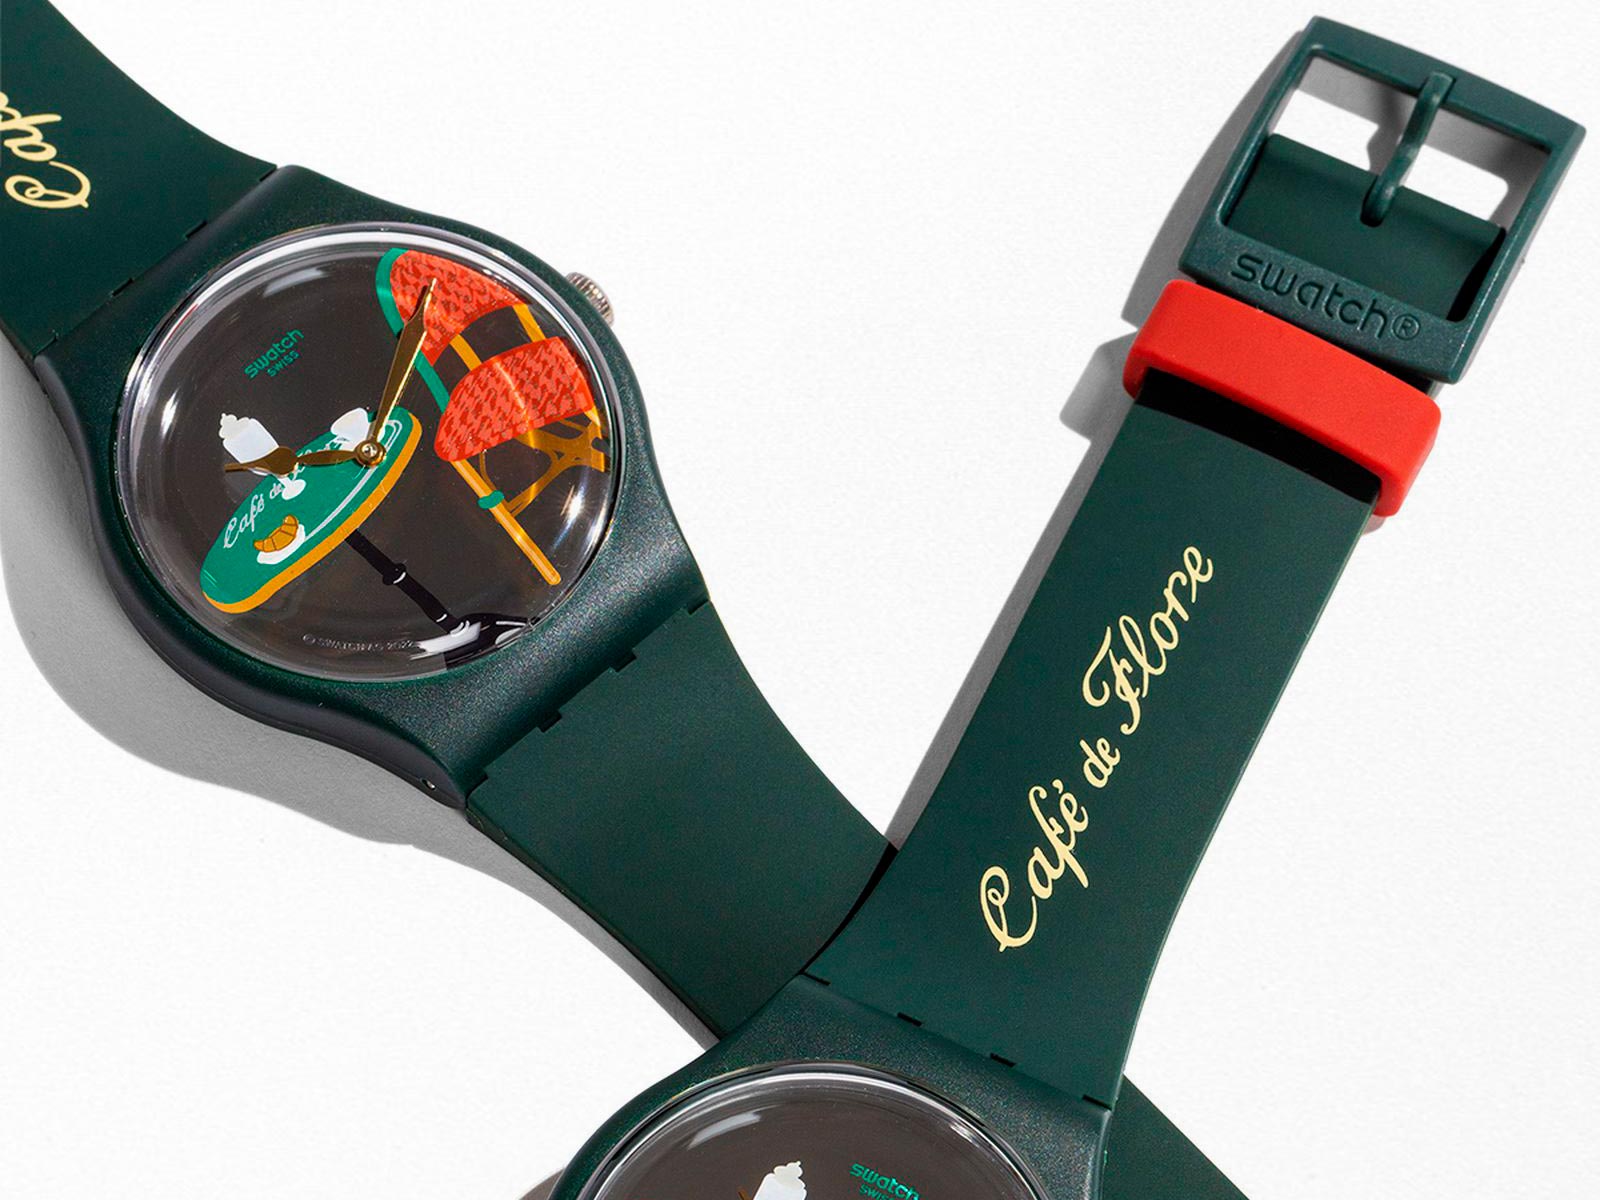 Swatch pays tribute to one of Paris’ most iconic landmarks